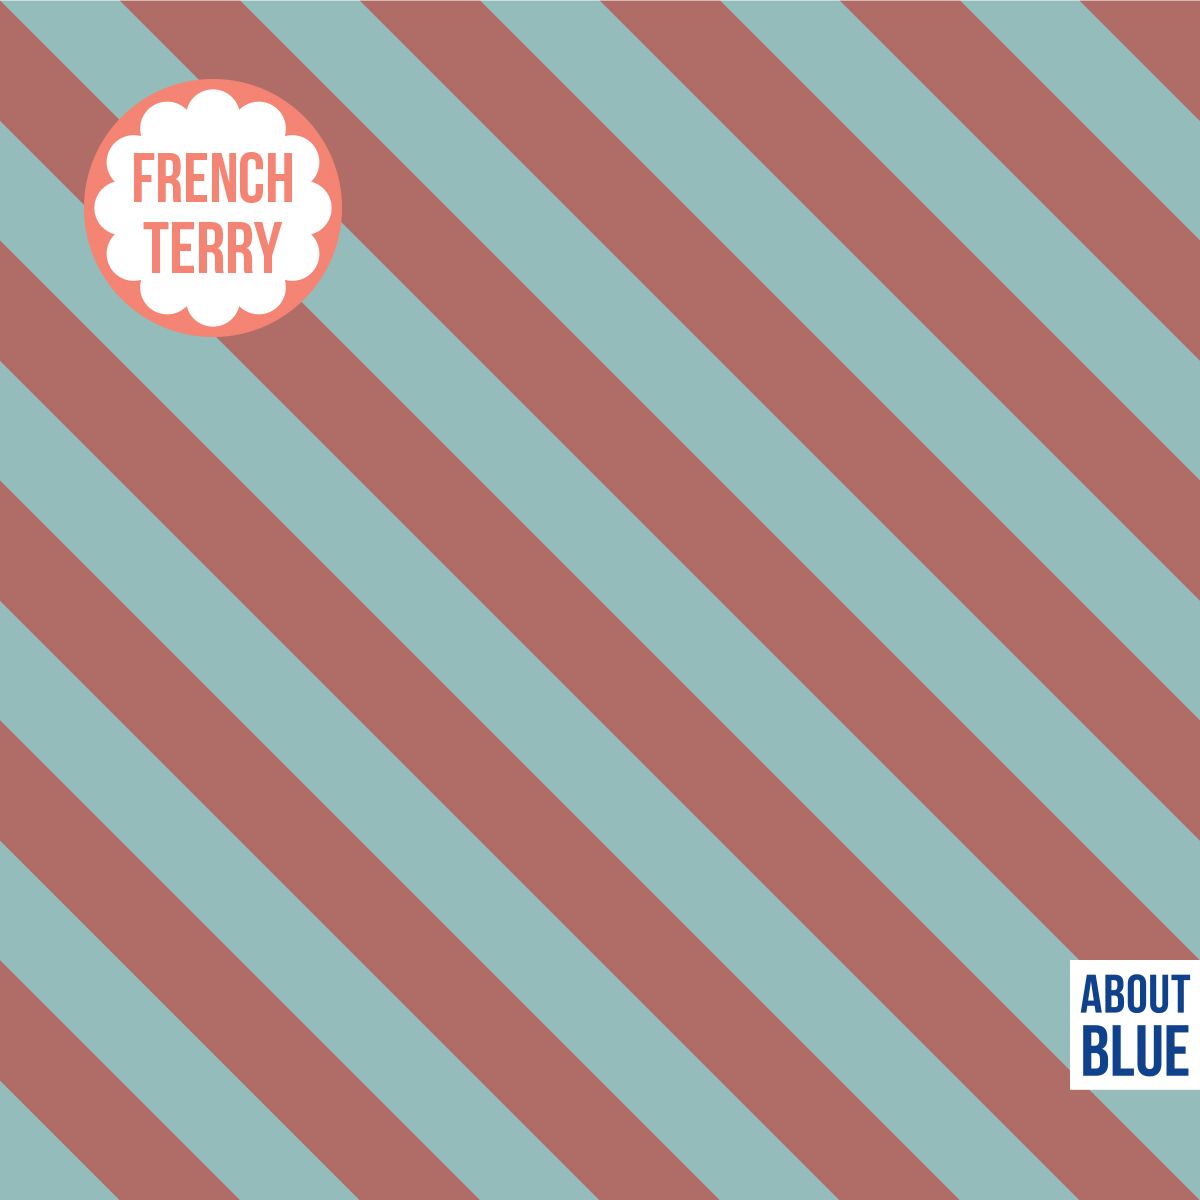 French Terry strawberry stripes